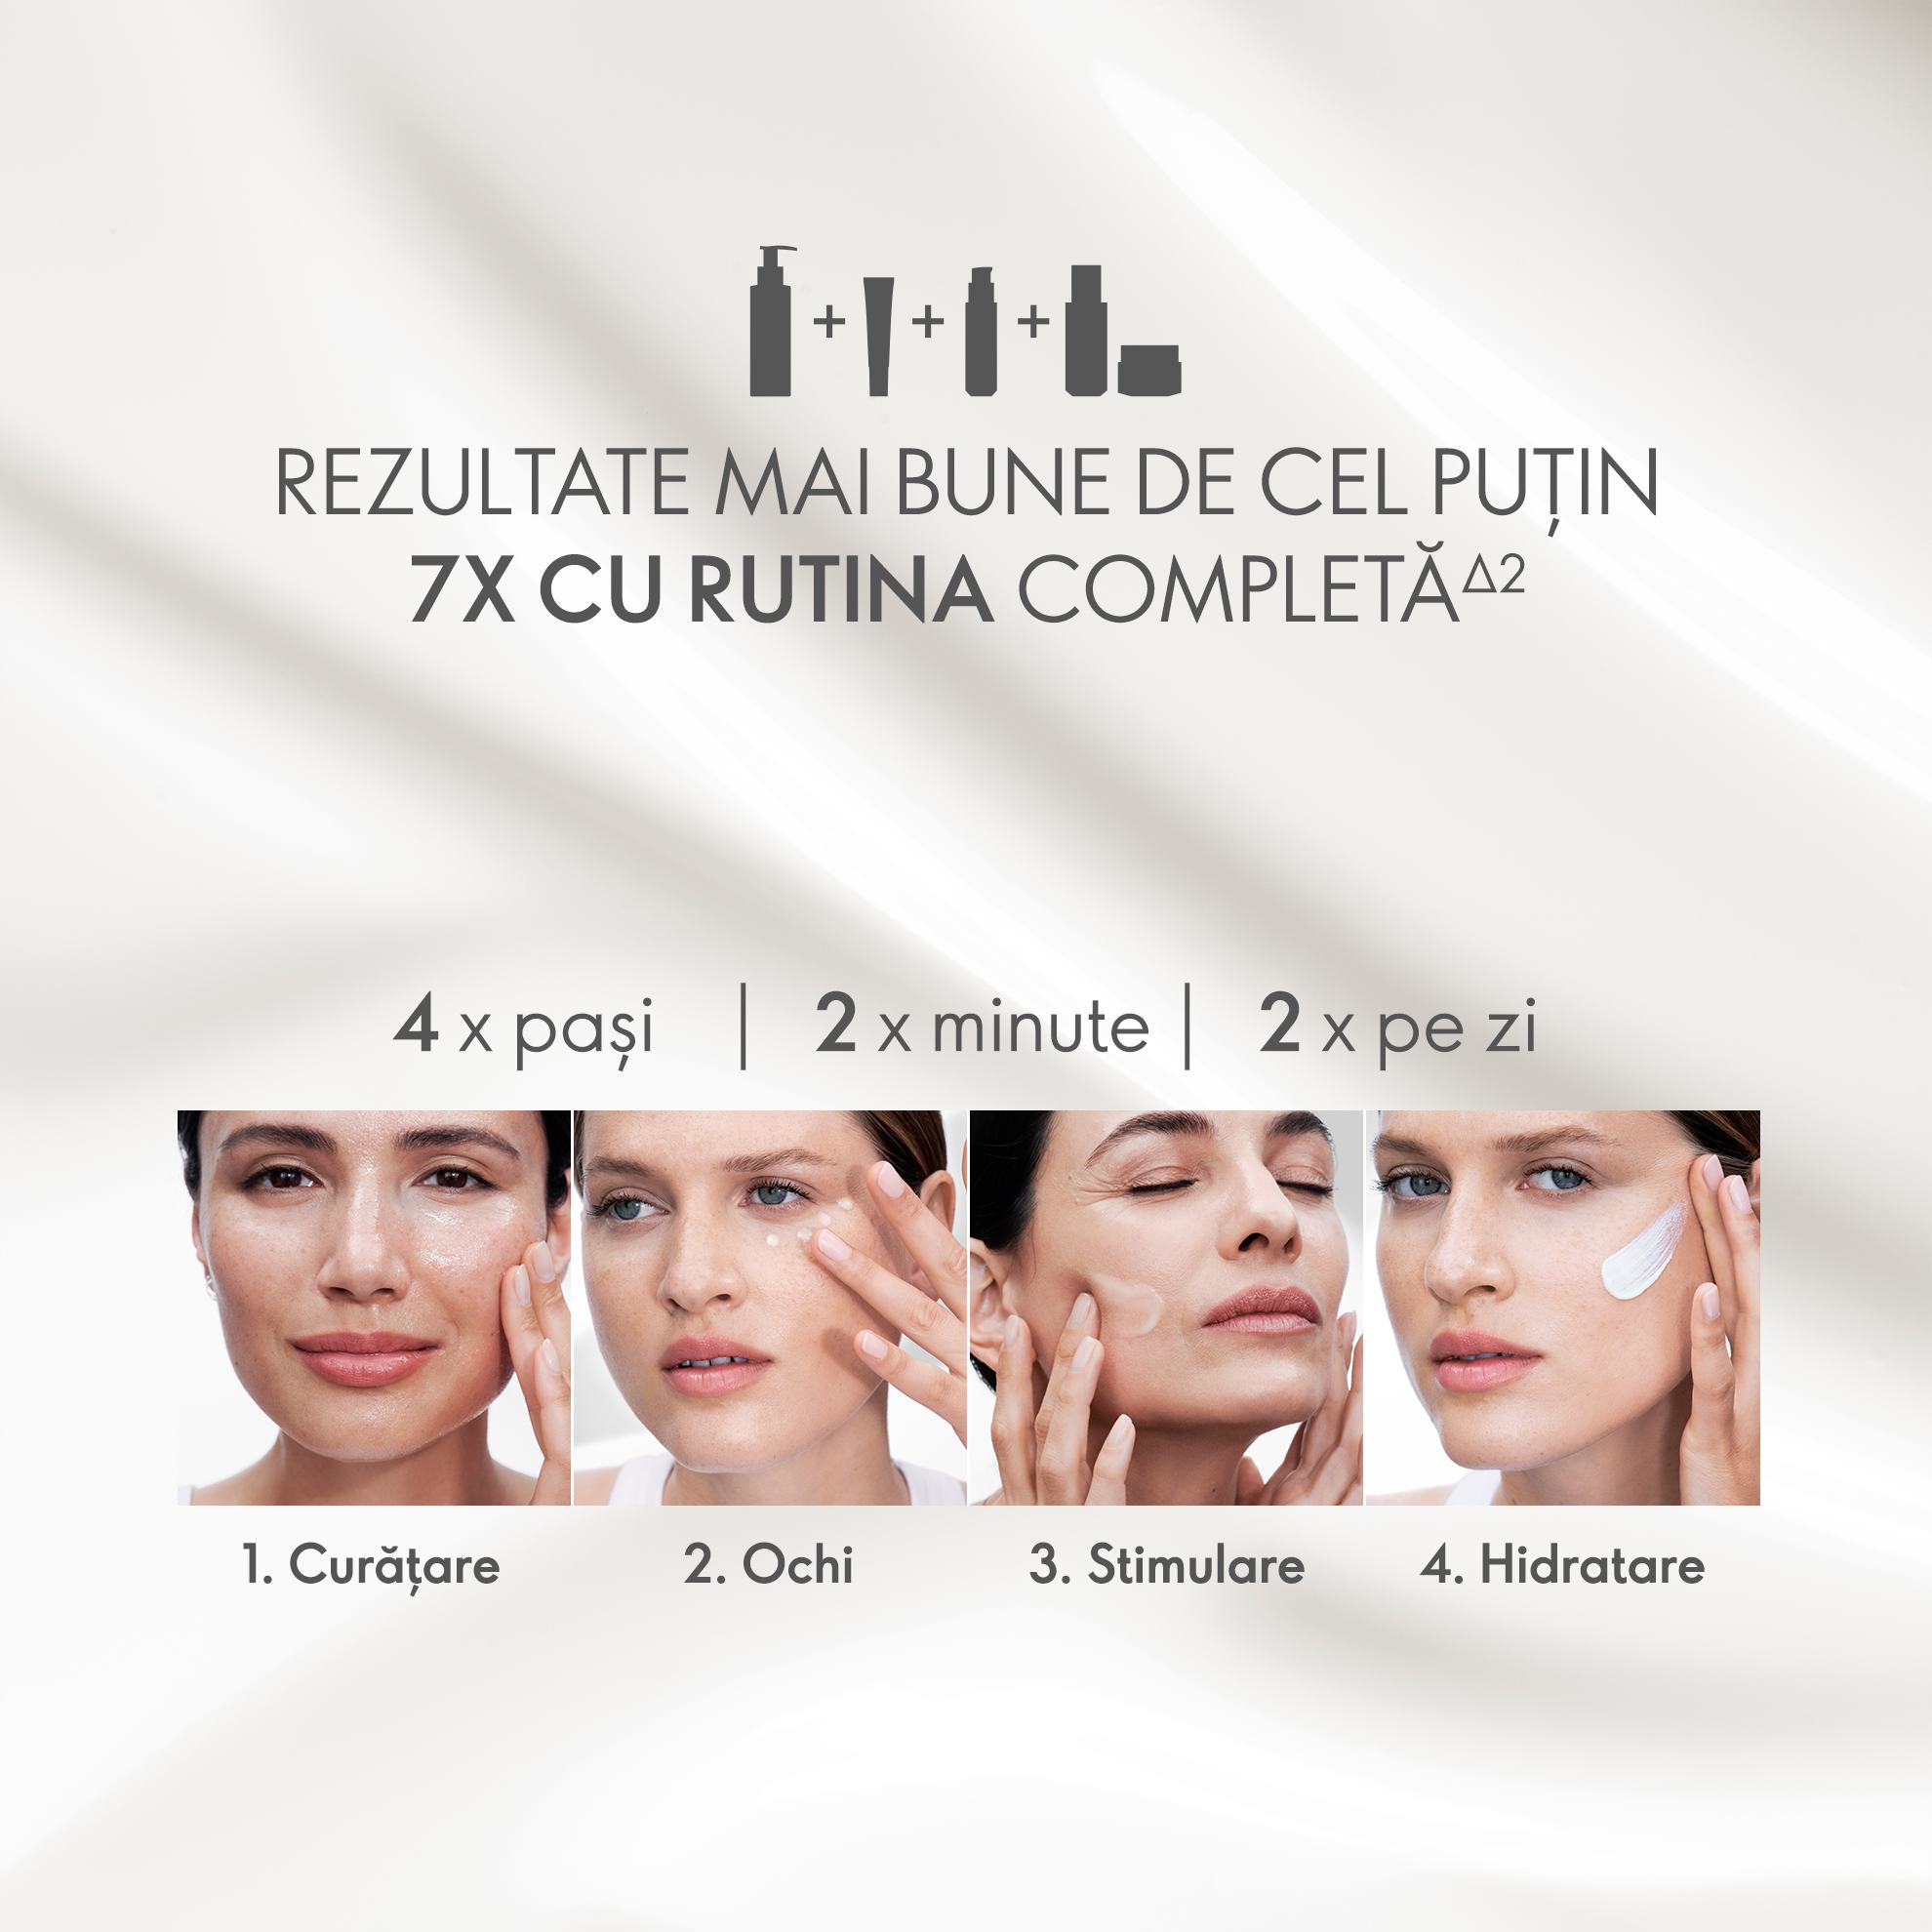 https://media-cdn.oriflame.com/productImage?externalMediaId=product-management-media%2fProducts%2f45595%2fMD%2f45595_11.png&id=17667436&version=1